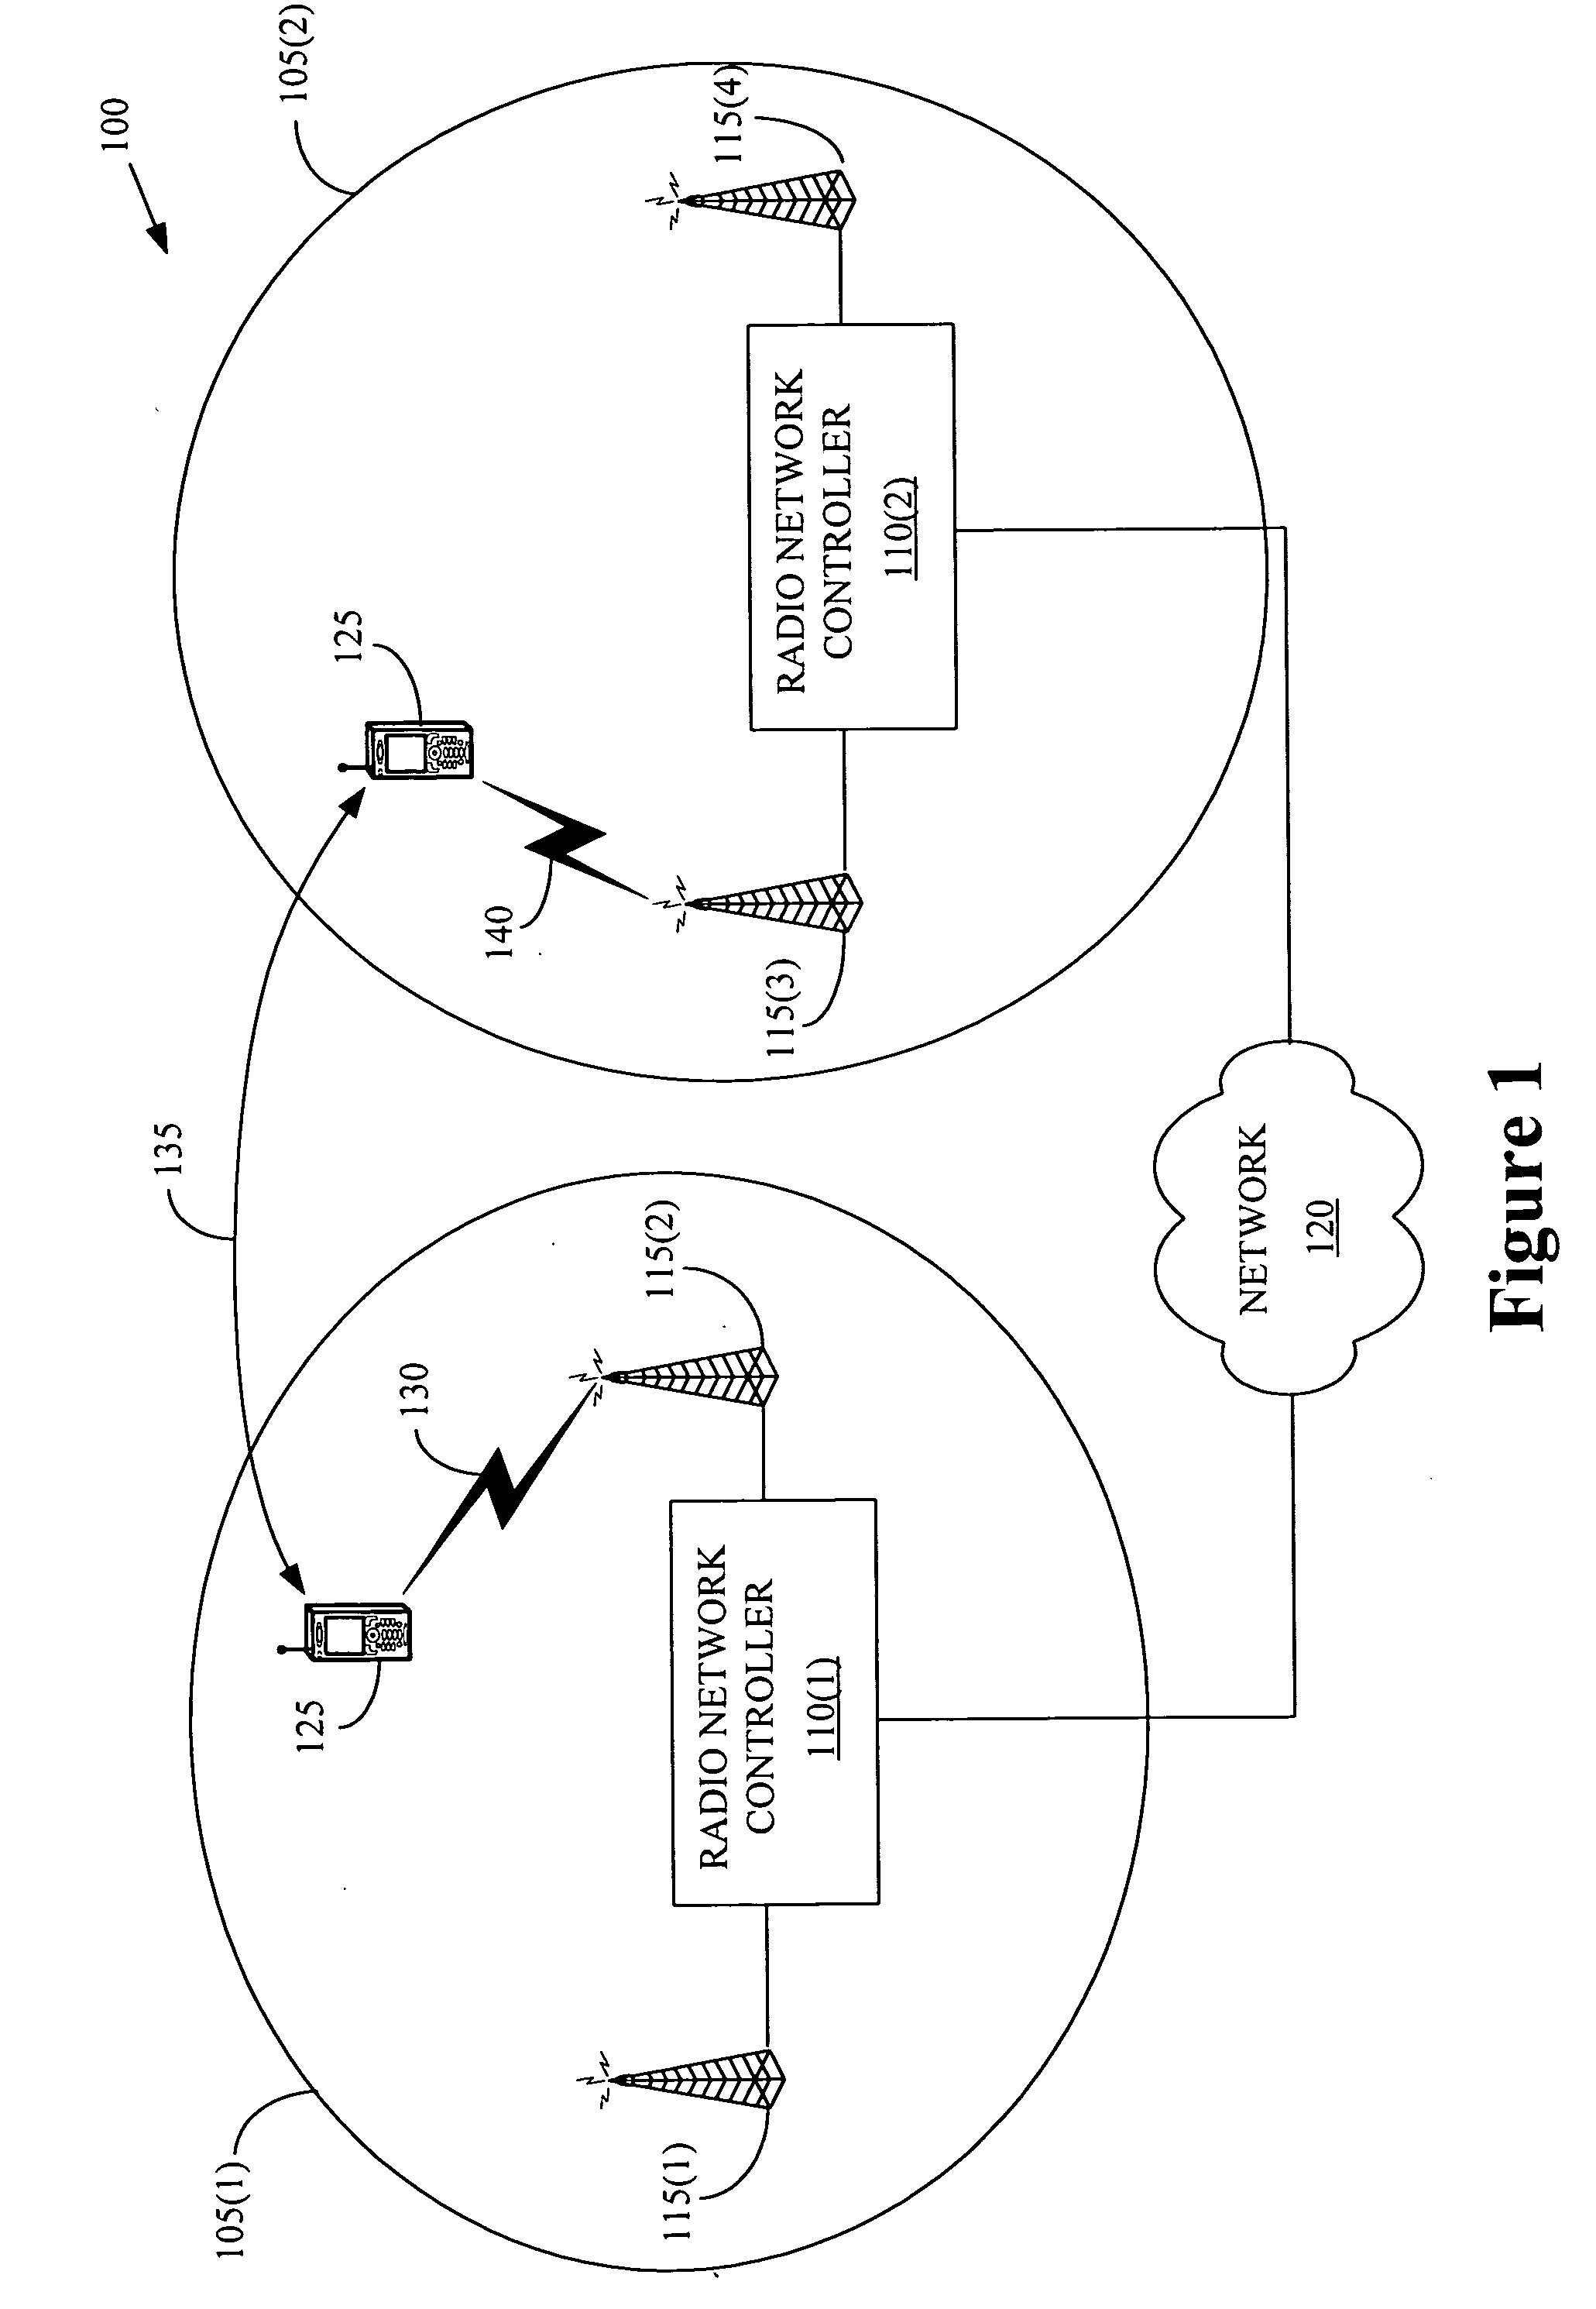 Method for selecting an inter-subnet idle hand-off technique